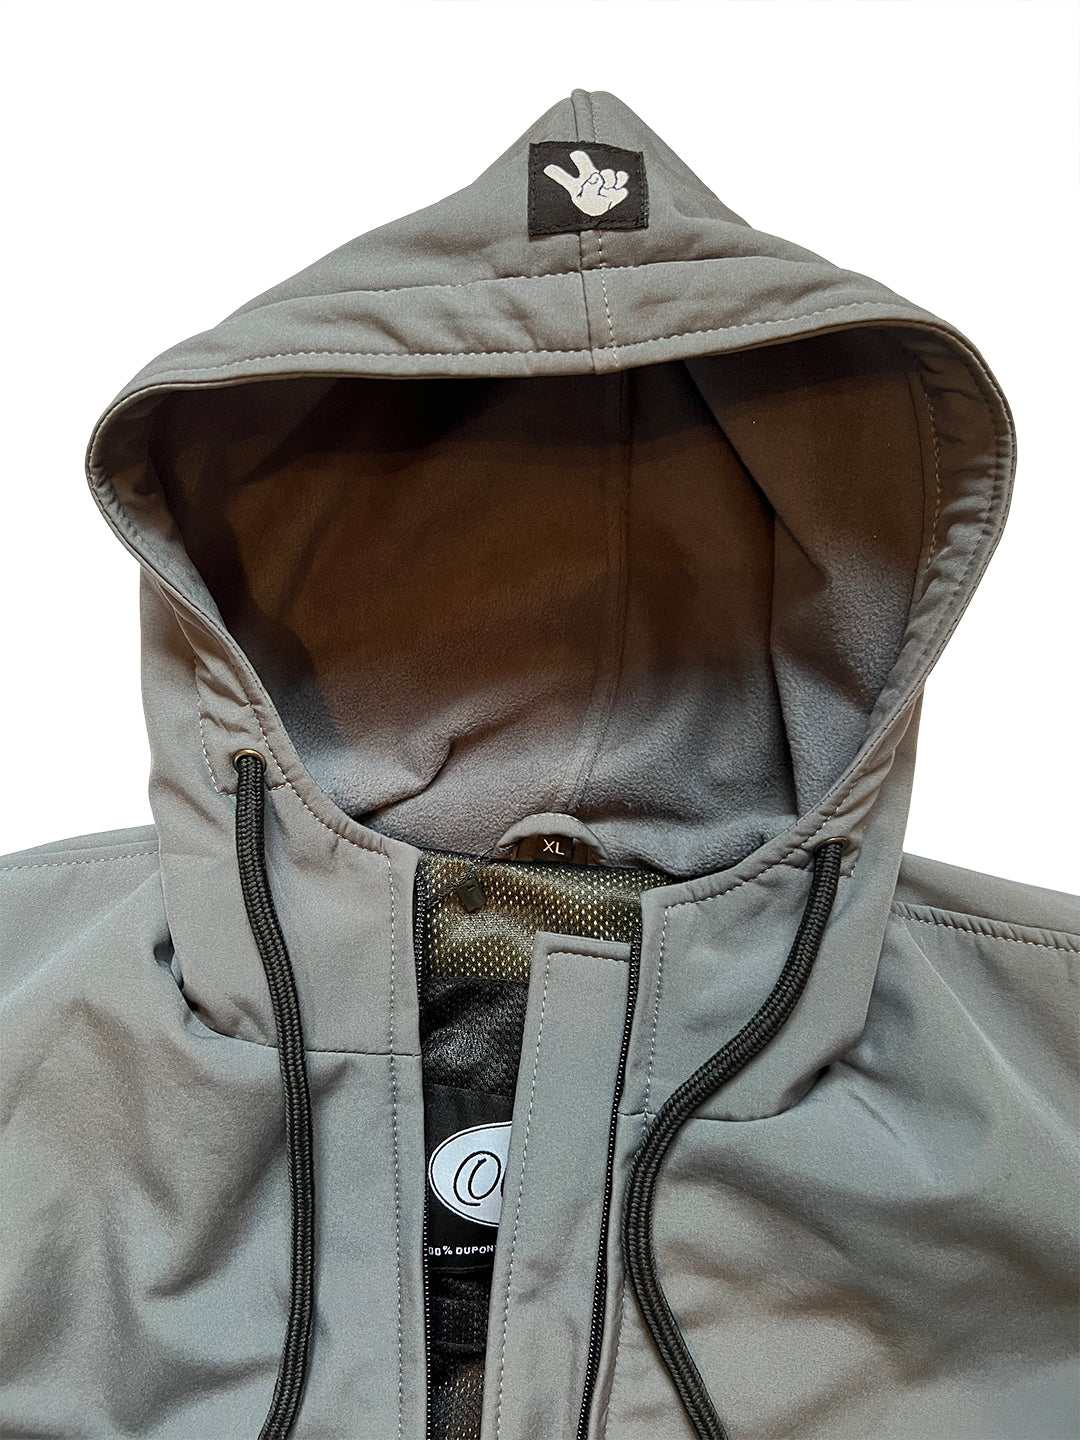 Protective motorcycle hoodie with full kevlar lining and removable armor